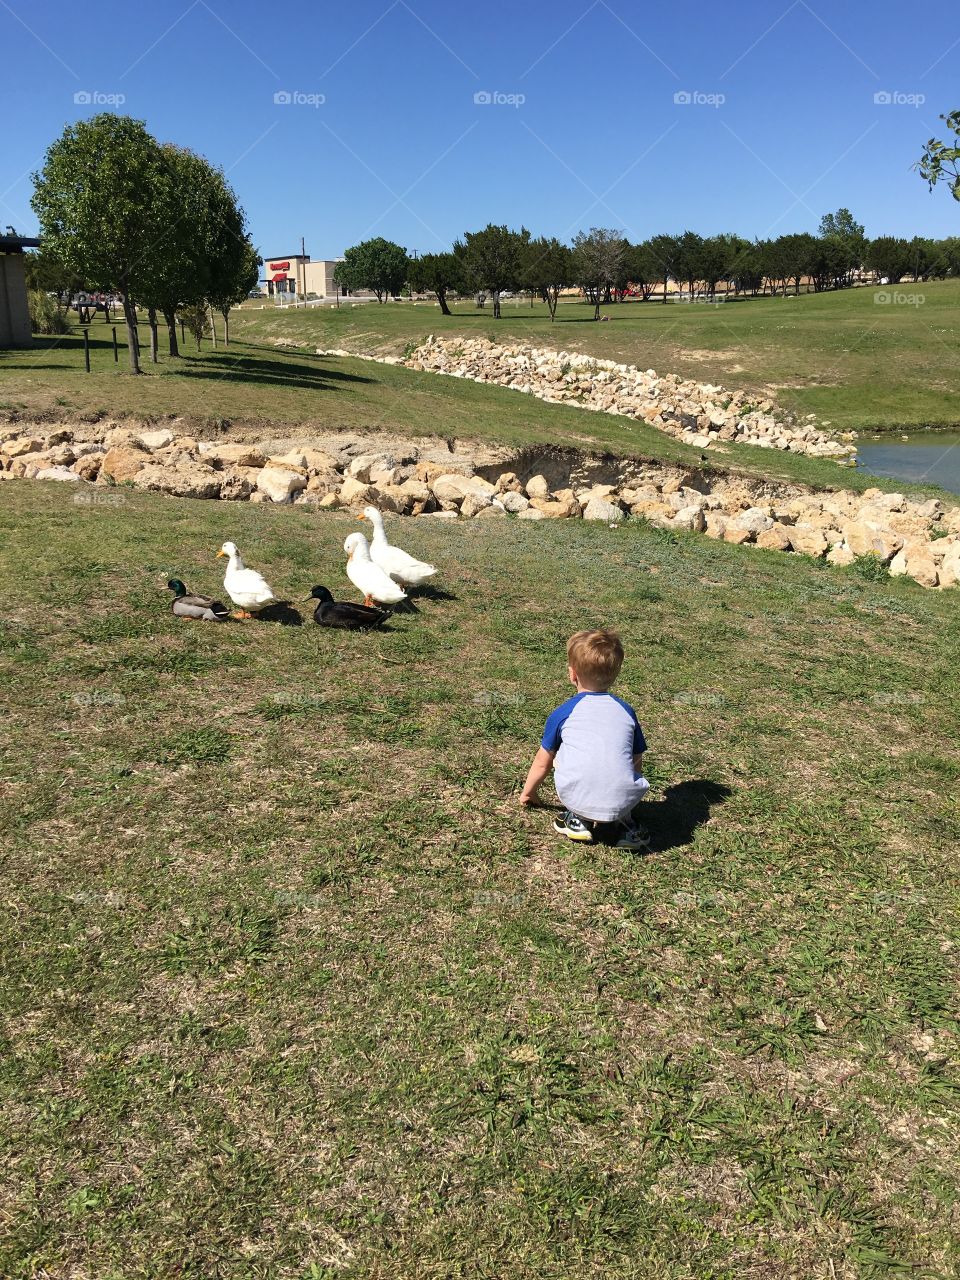 Playing with the ducks